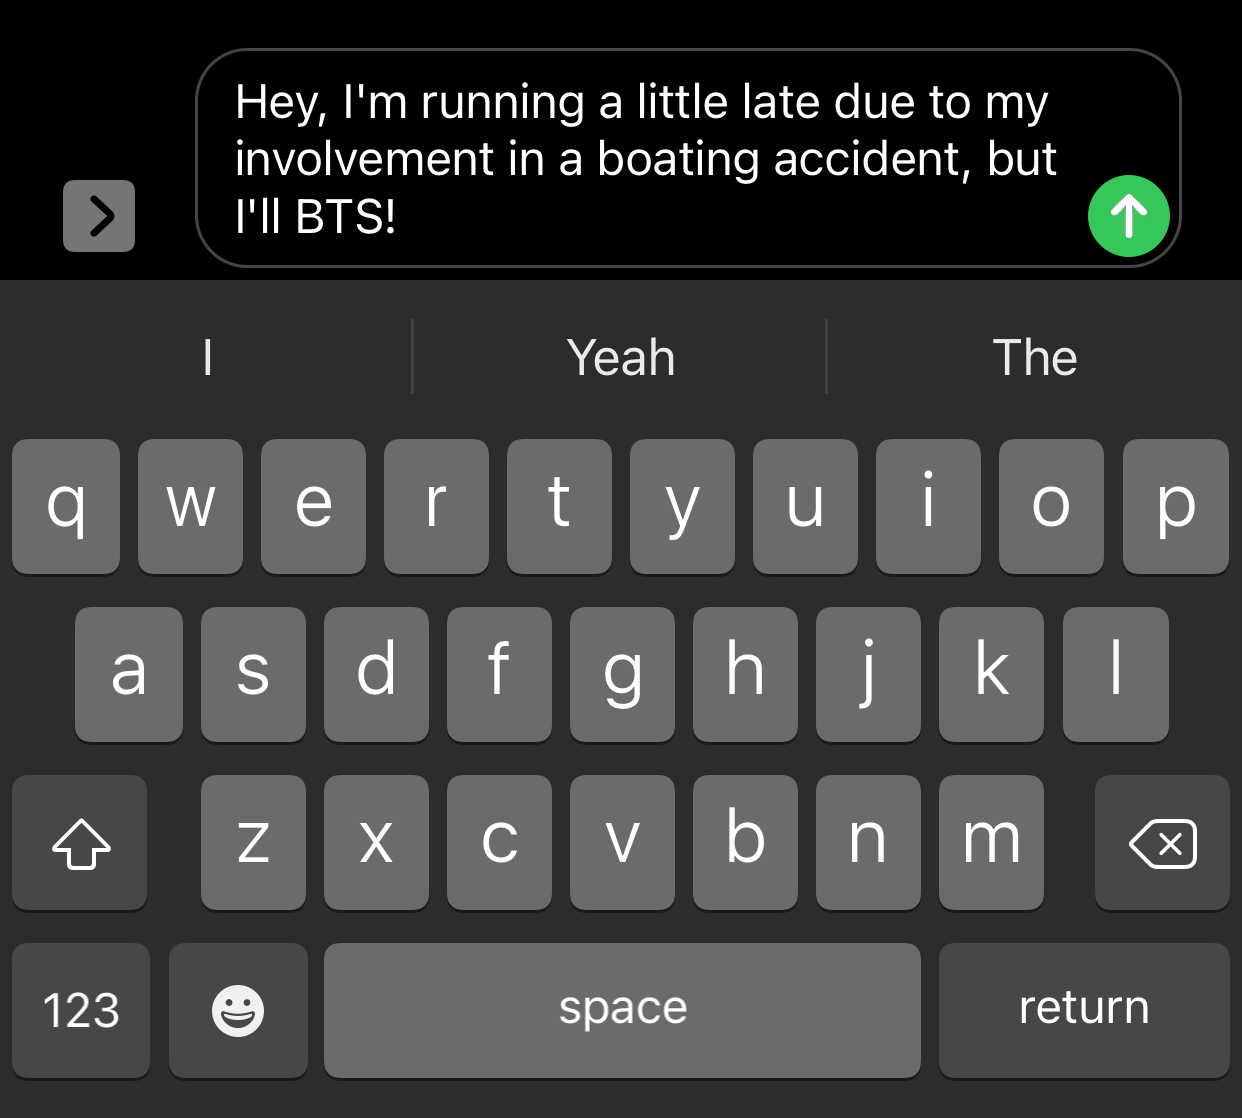 An example of the initialism BTS in a text message where it means be there soon.